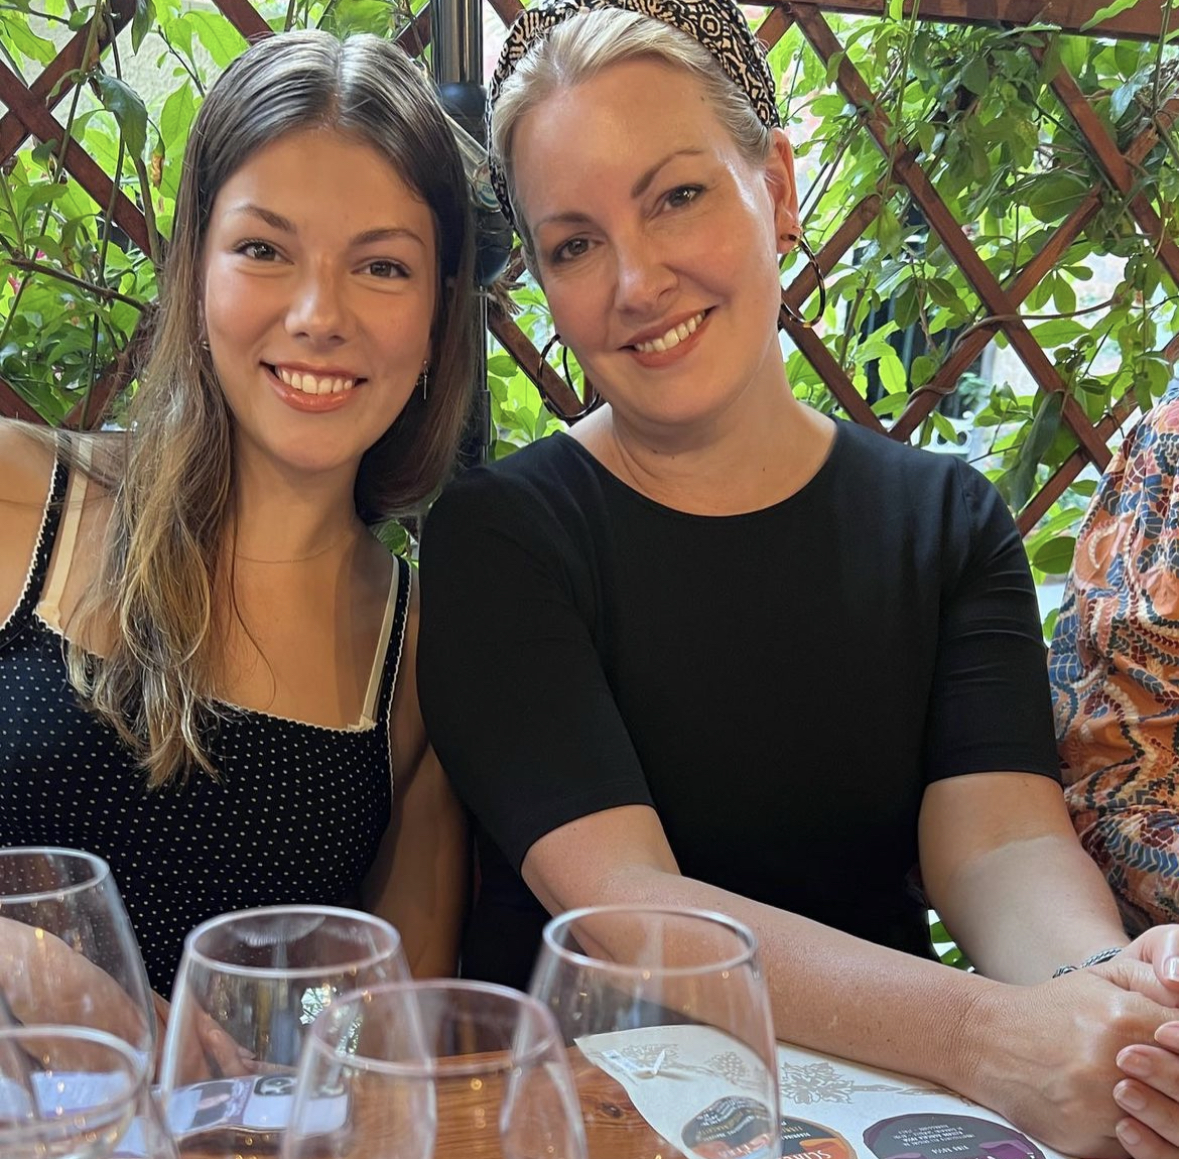 From left, Ruby Cobourn smiles at the dinner table with her mother on June 22 in Monterosso, Italy. They are a week into their European excursion together. 